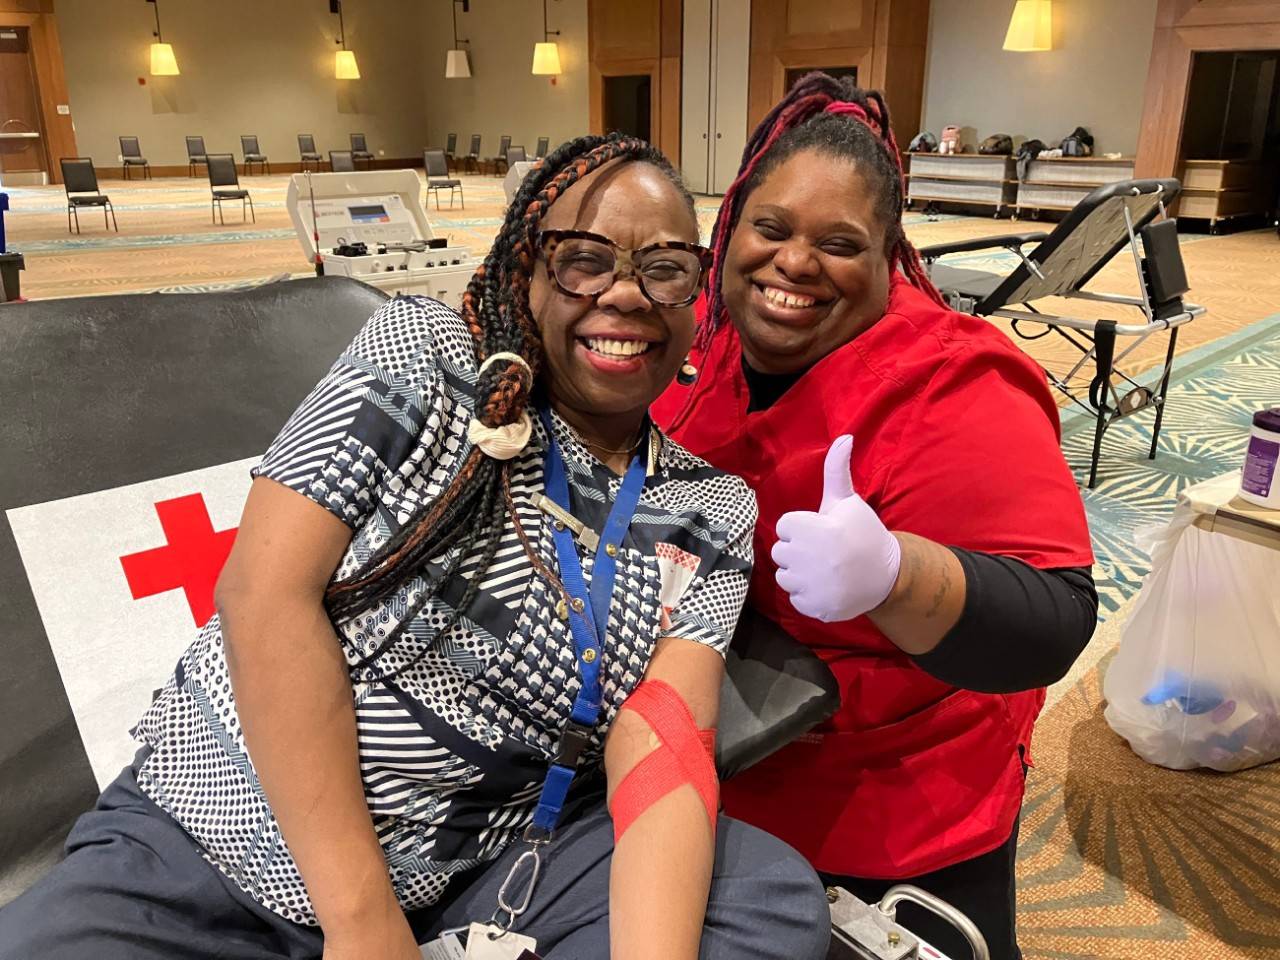 January 11, 2023. Raleigh, NC. Blood Donor Lakeiska Williams of North Carolina donates blood during the ABC11 Together Blood Drive on 1-11-2023 at the Marriott Raleigh Crabtree Valley. Grateful to be a lifesaver, she poses for a photo with Red Cross collection team member Dana Robinson. Photo by Tai Wong/American Red Cross.